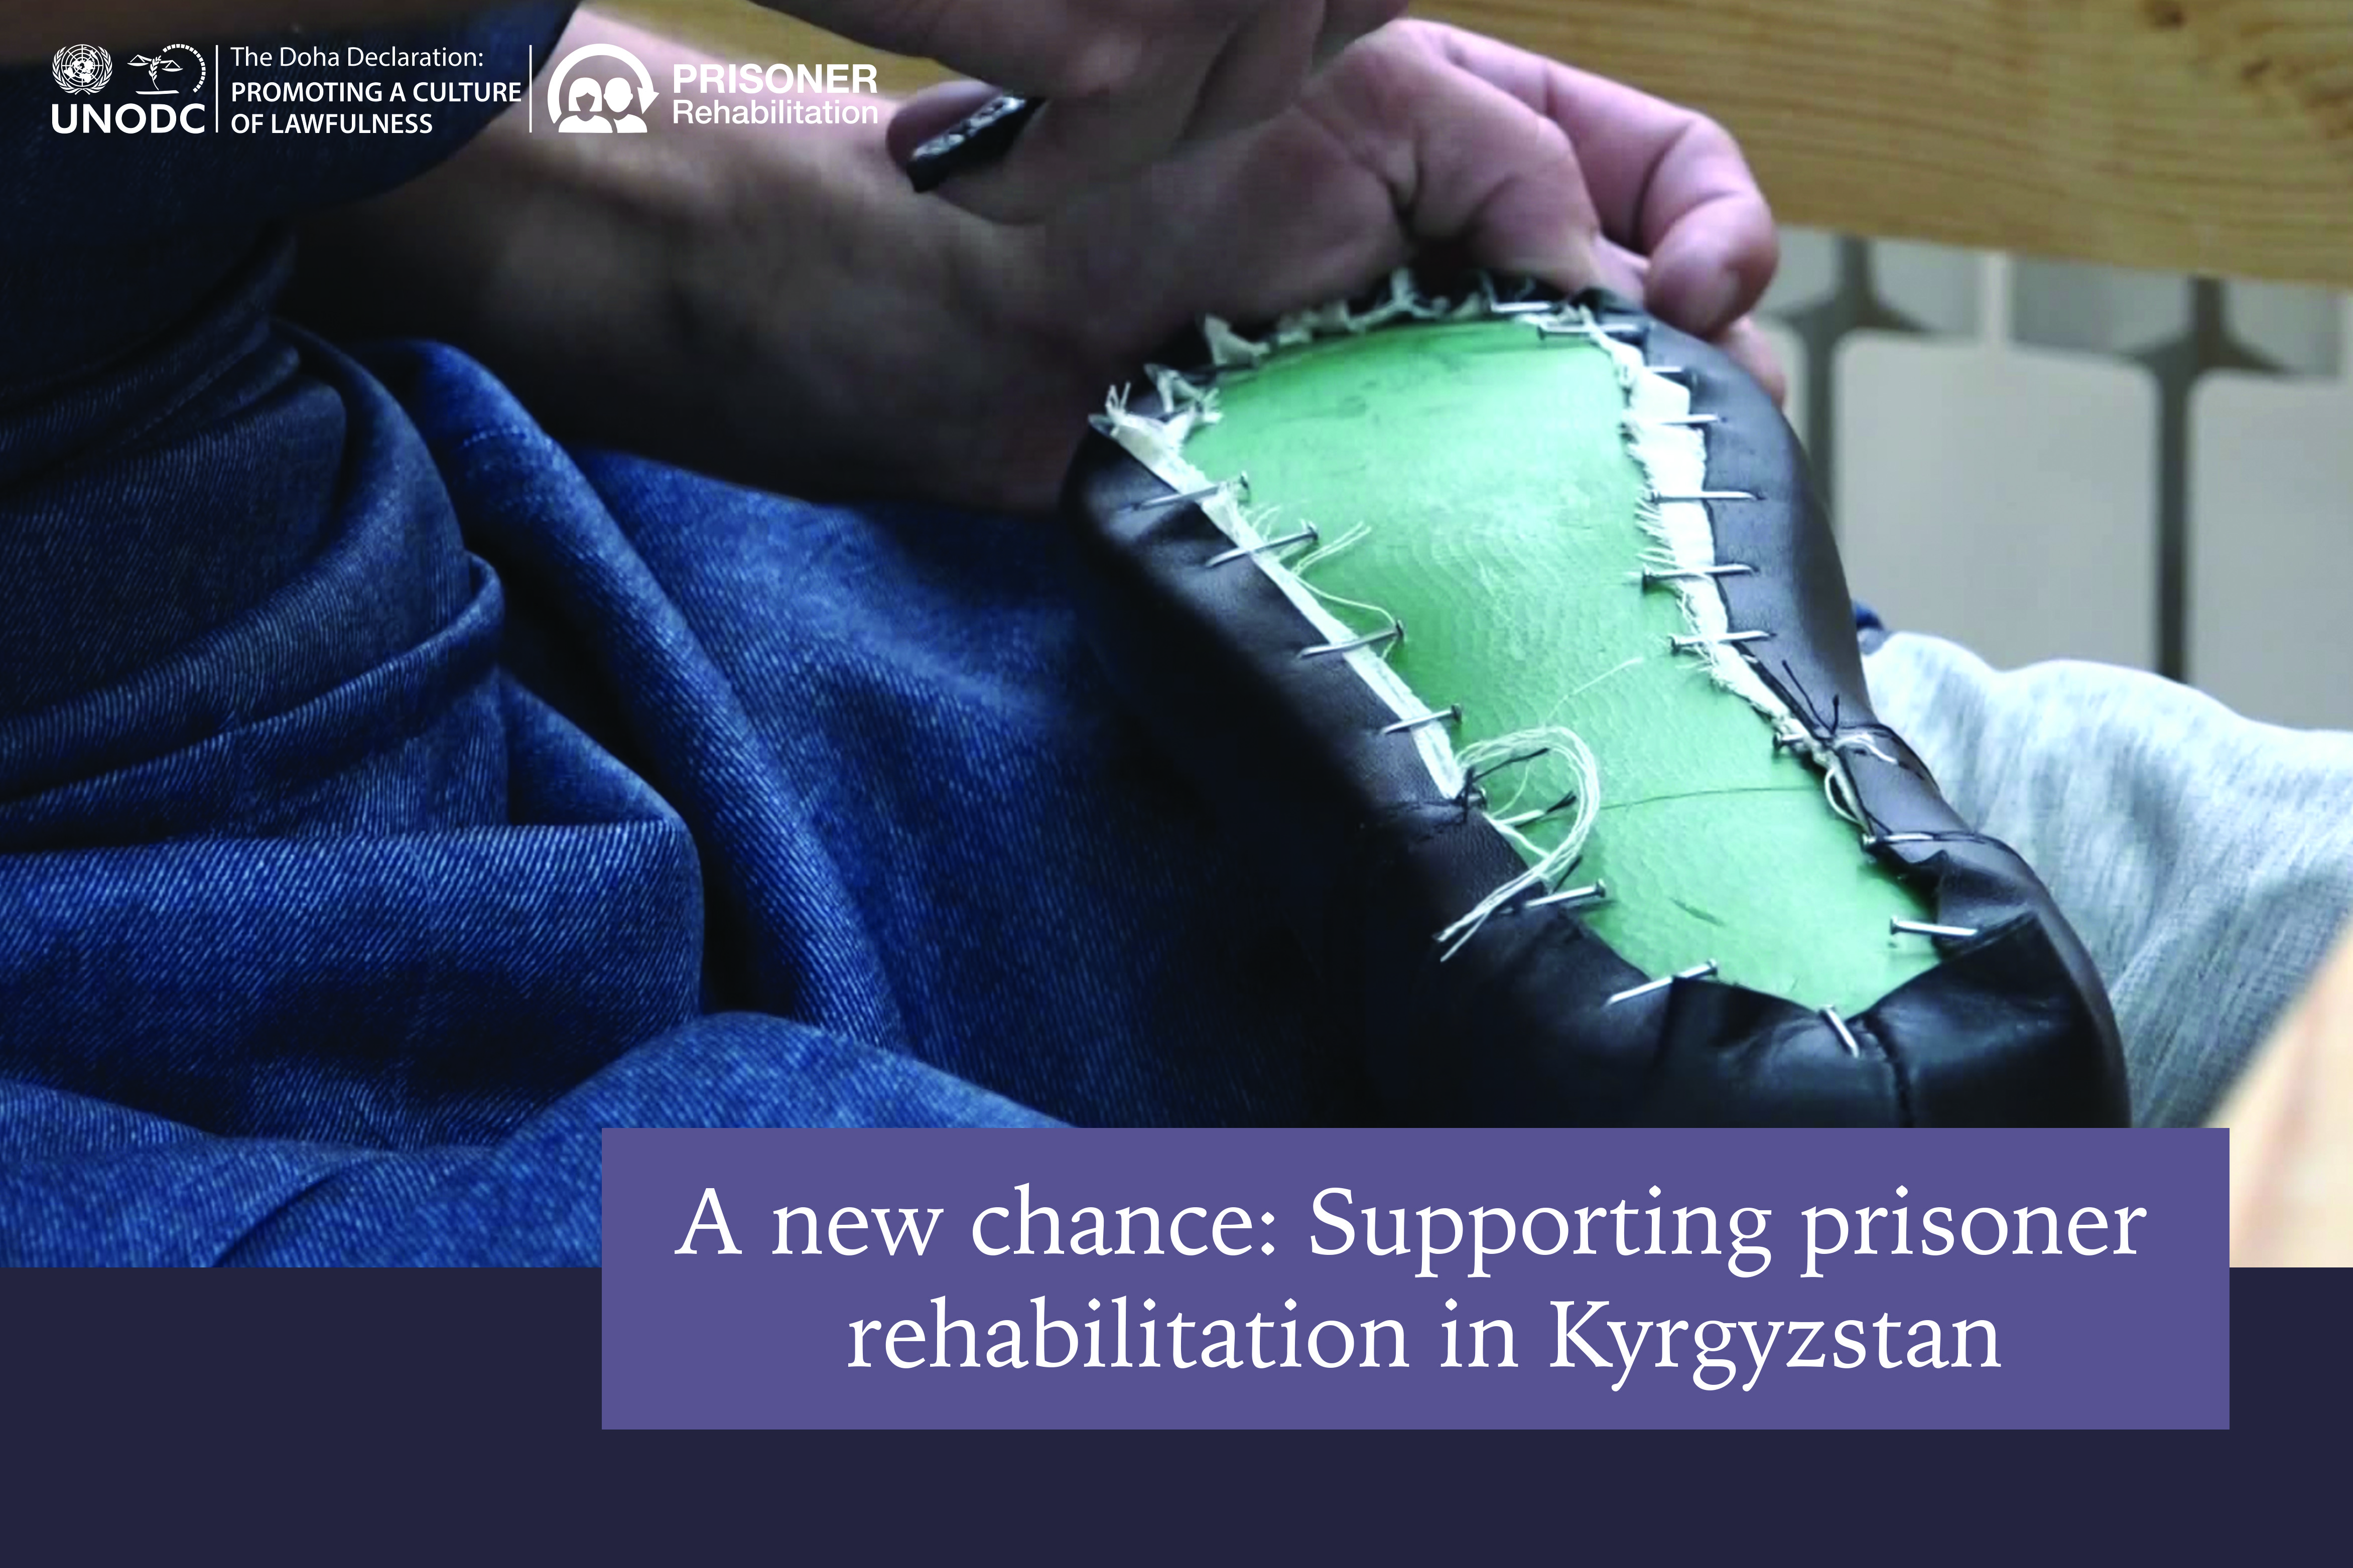 Providing a new chance for prisoners in Kyrgyzstan: UNODC launches country's latest rehabilitation skills training facilities